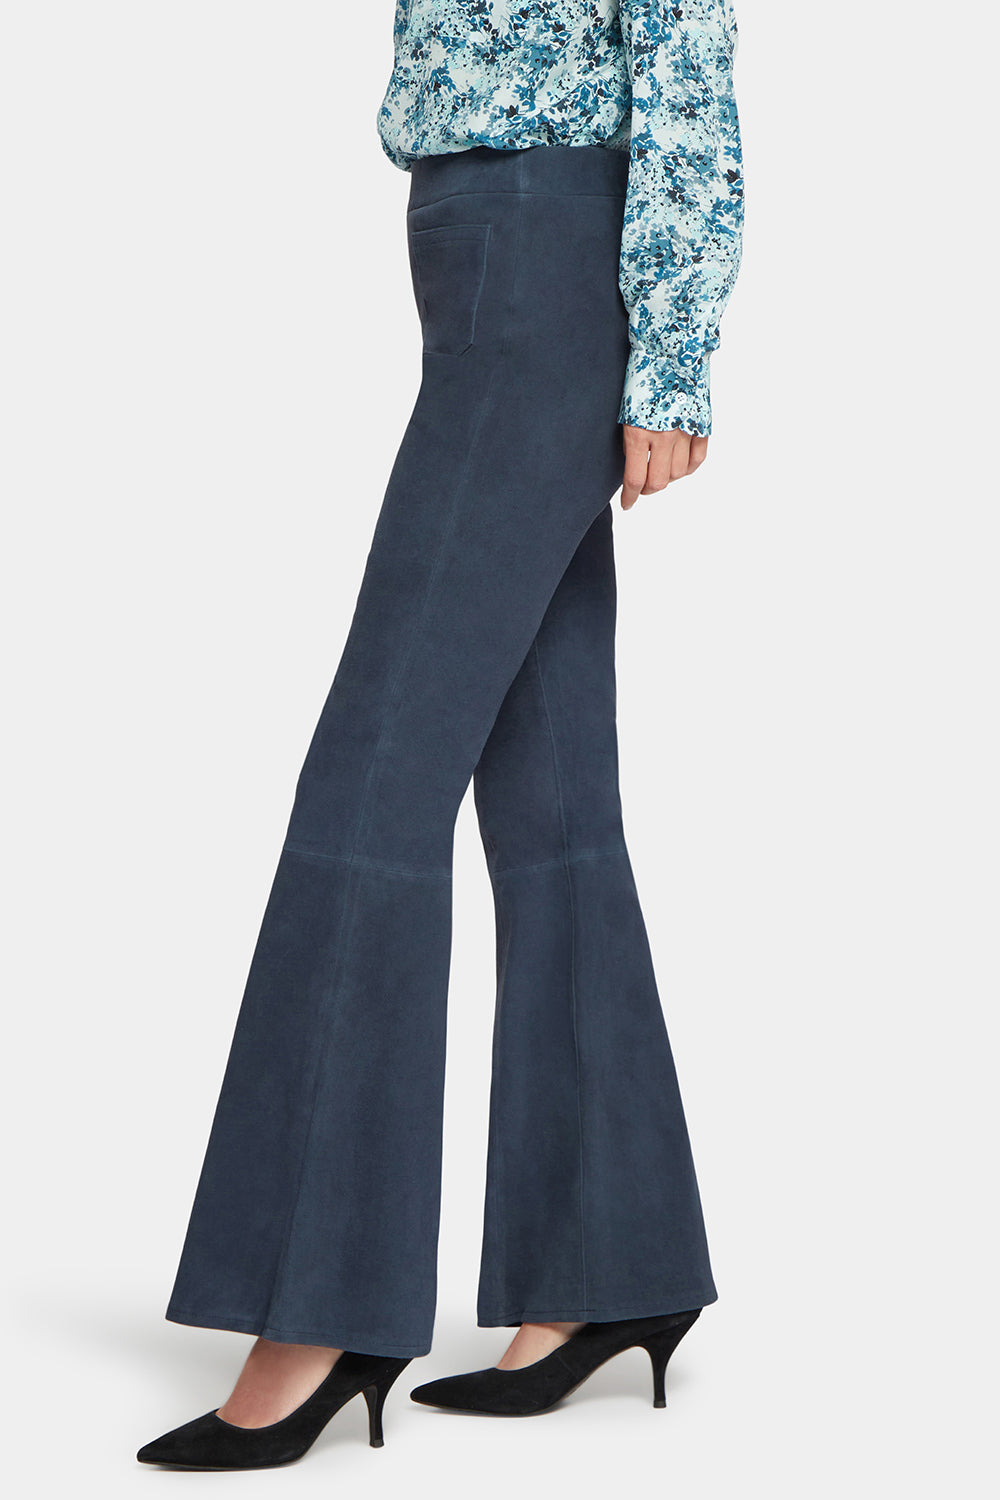 Marble Print Pants Retro 90s Flared Pants Blue Wavy Print Bell Bottoms Stretch  Trousers Funky Pull on Pants Soft Knit Wide Leg Bottoms -  Israel